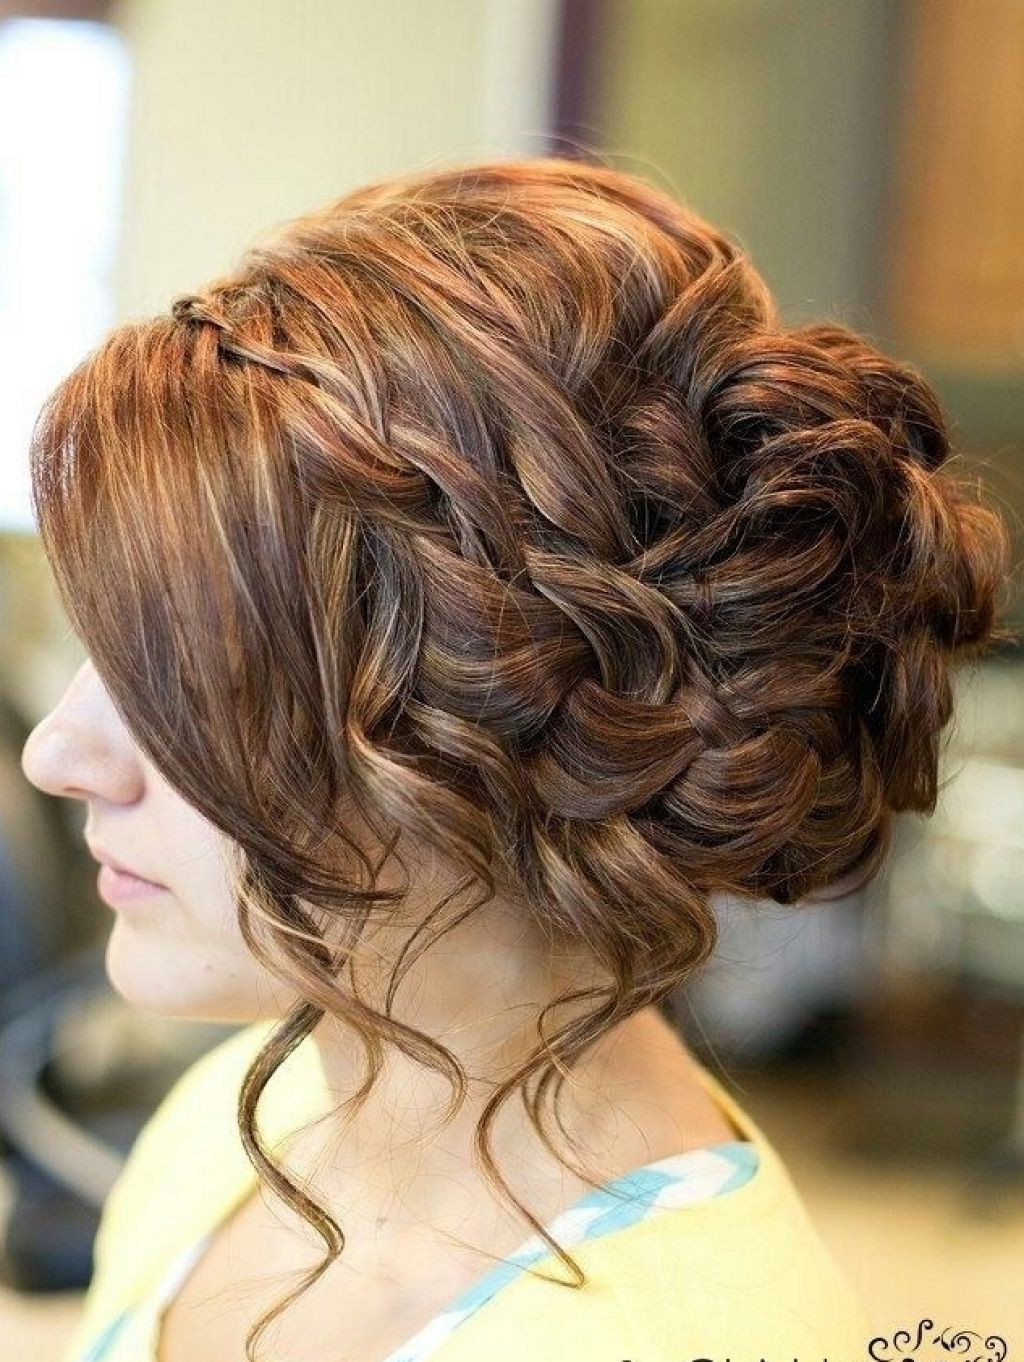 Braids Hairstyles For Prom
 14 Prom Hairstyles for Long Hair that are Simply Adorable